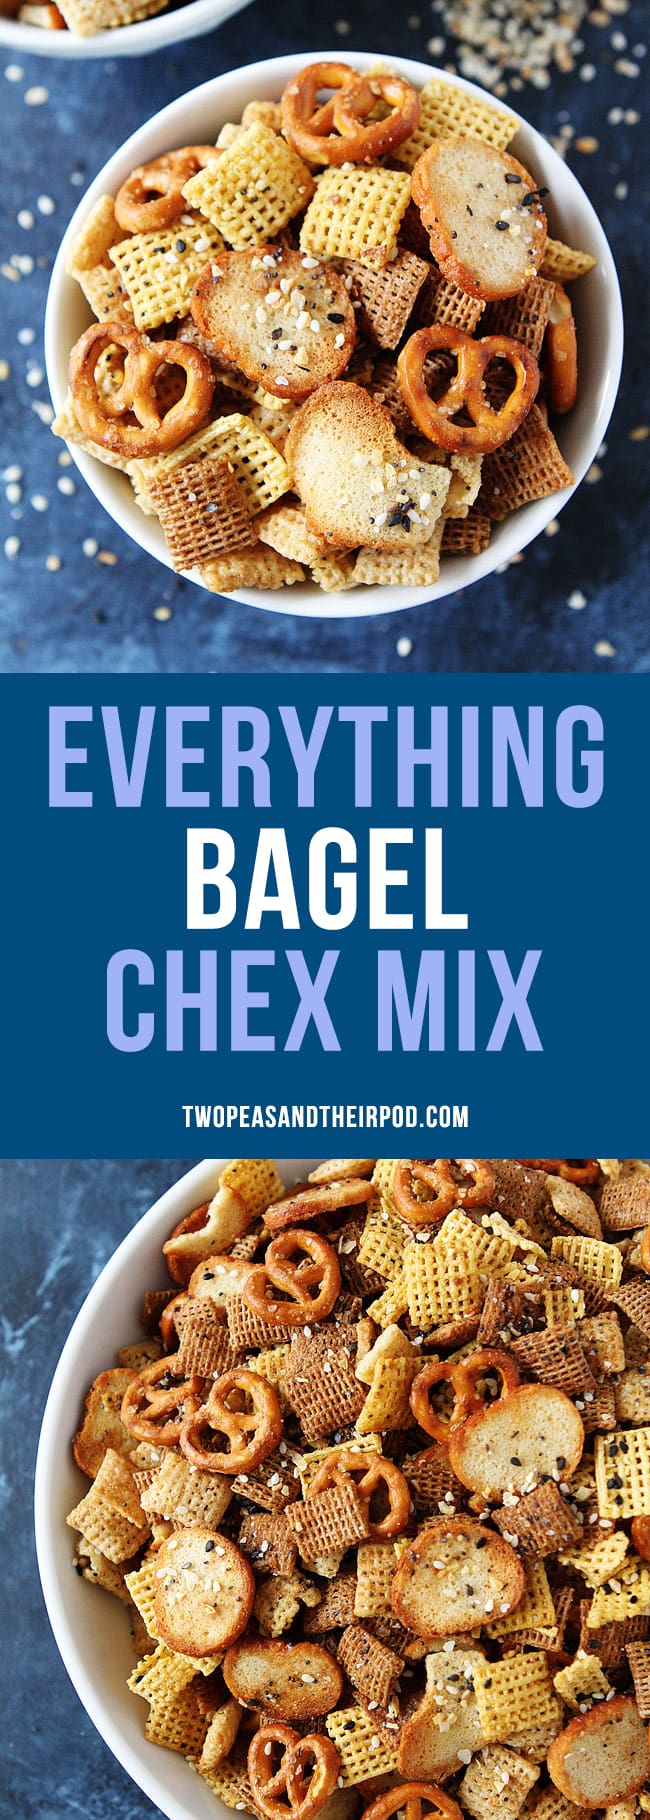 Everything Bagel Chex Mix is the perfect snack for parties, game day, or any day! #chexmix #snack #appetizer #partyfood